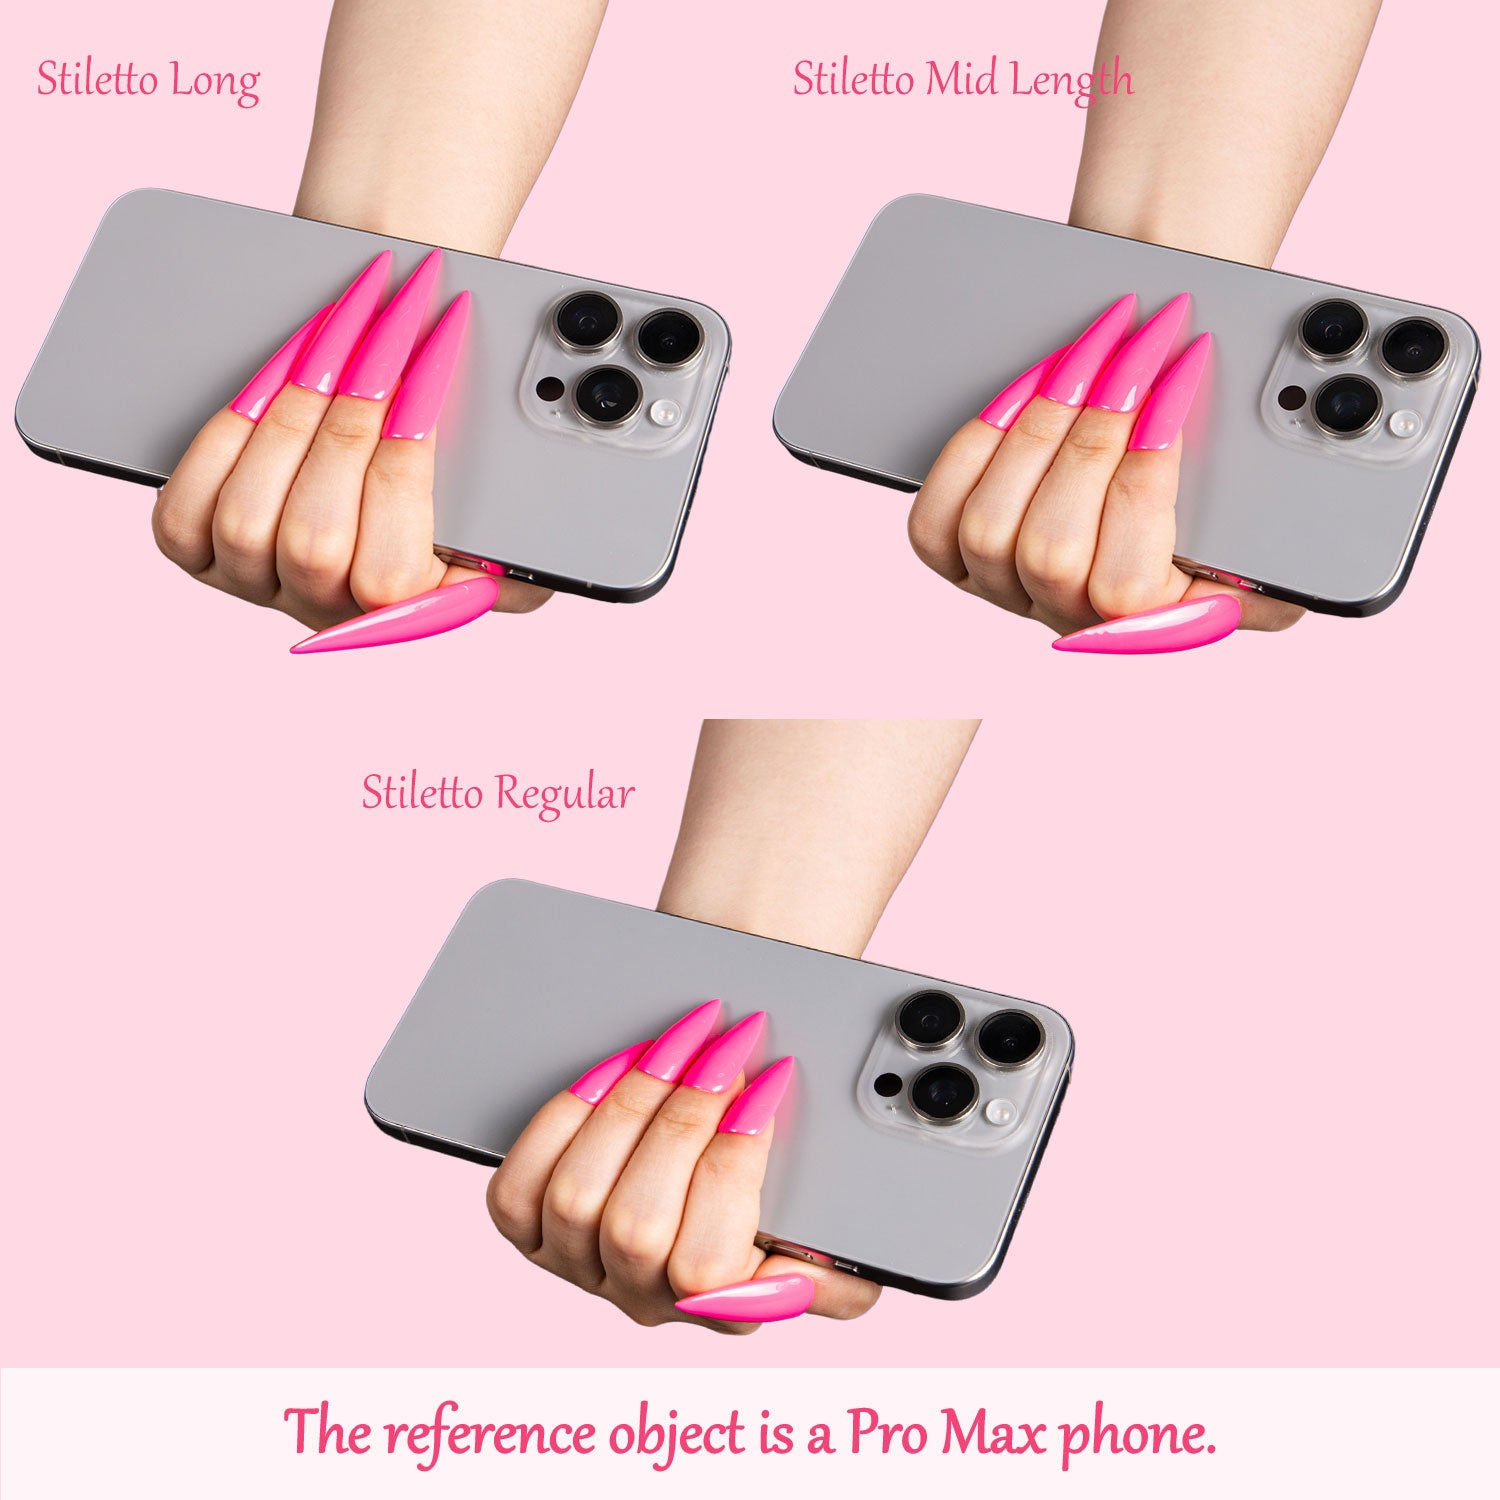 Comparative display of three lengths of pink stiletto press-on nails (Long, Mid Length, Regular) with a hand holding a Pro Max phone for size reference.